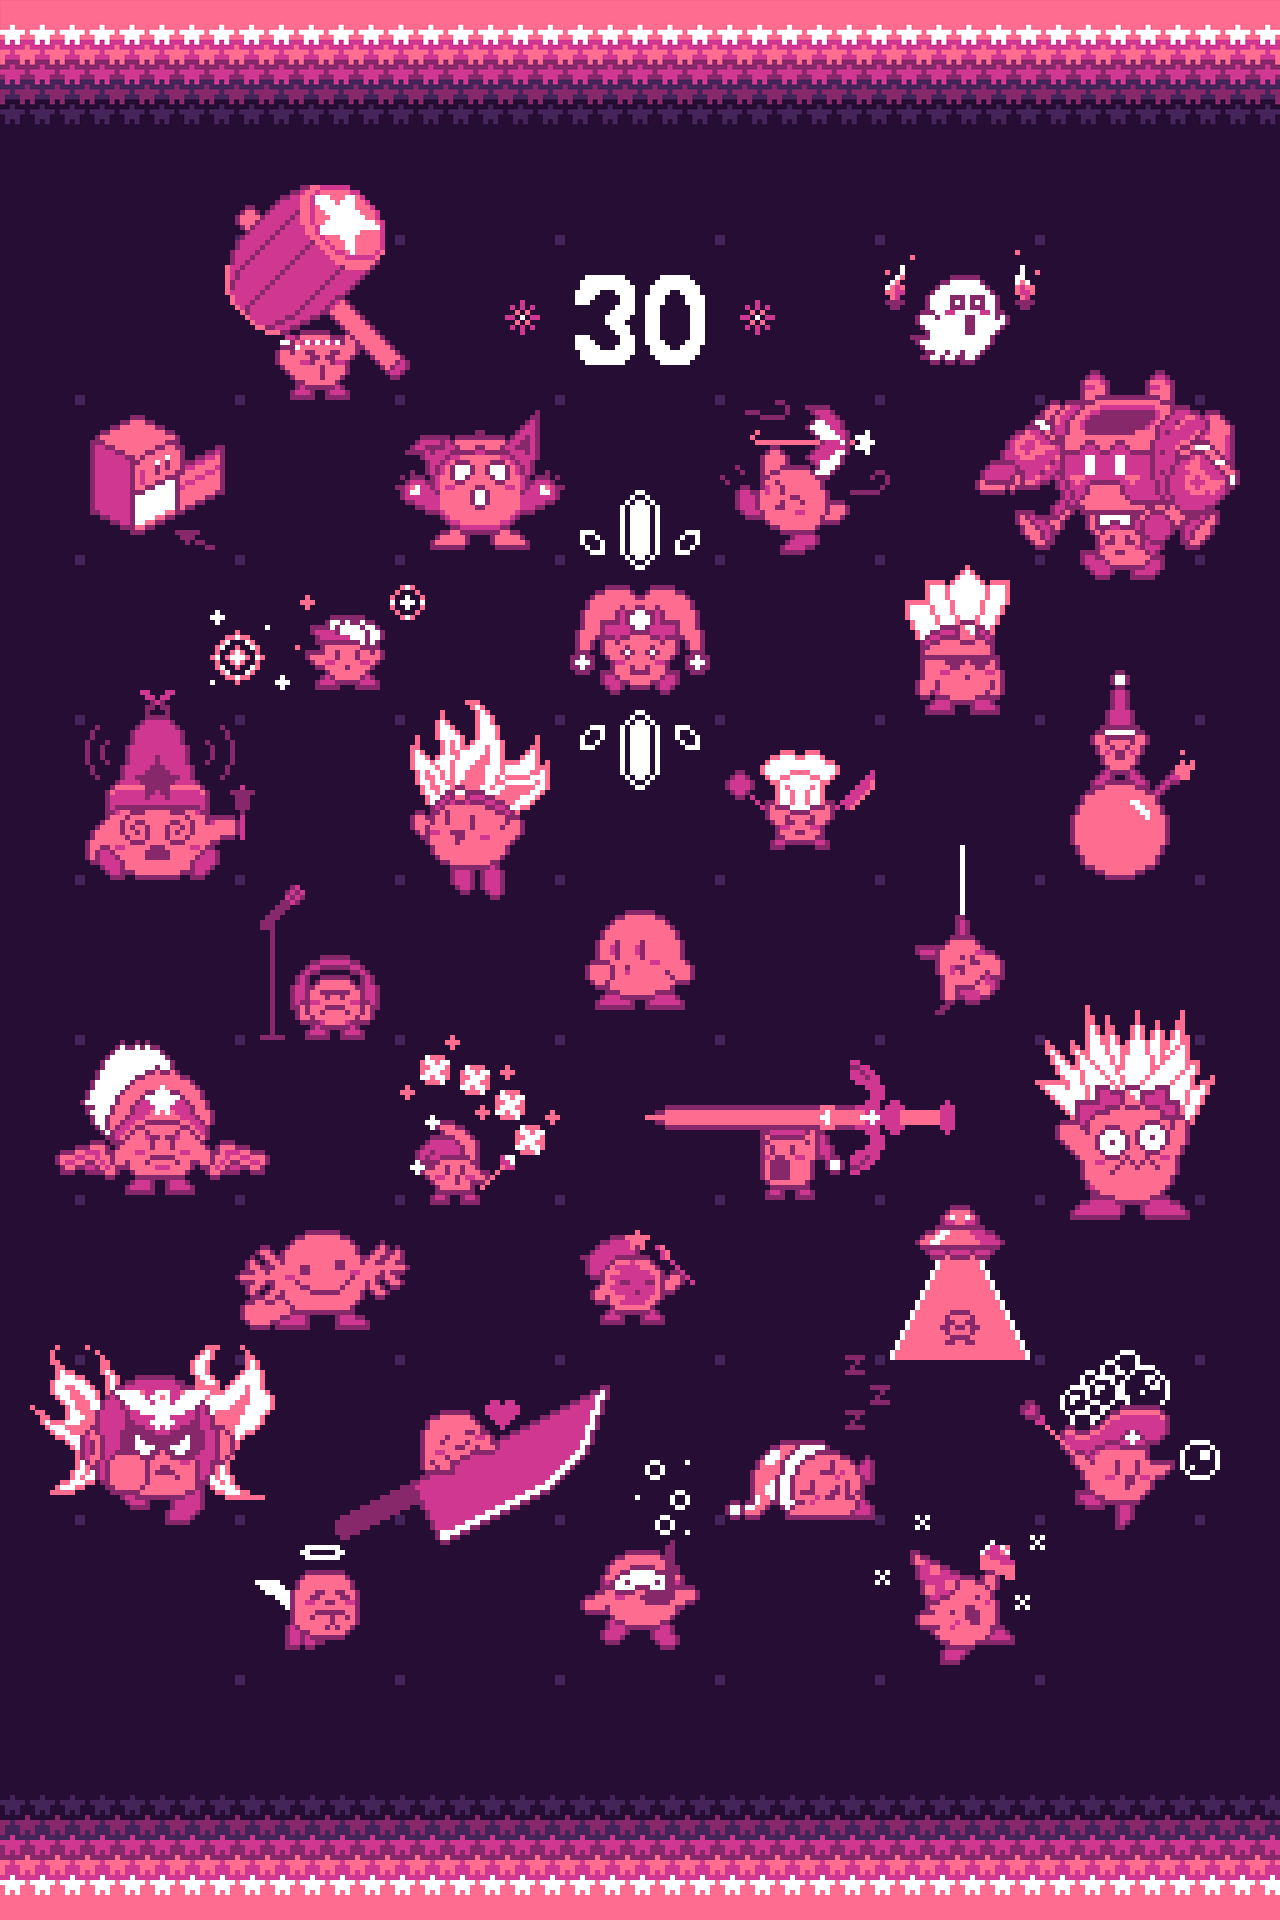 First Post - Kirby 30!